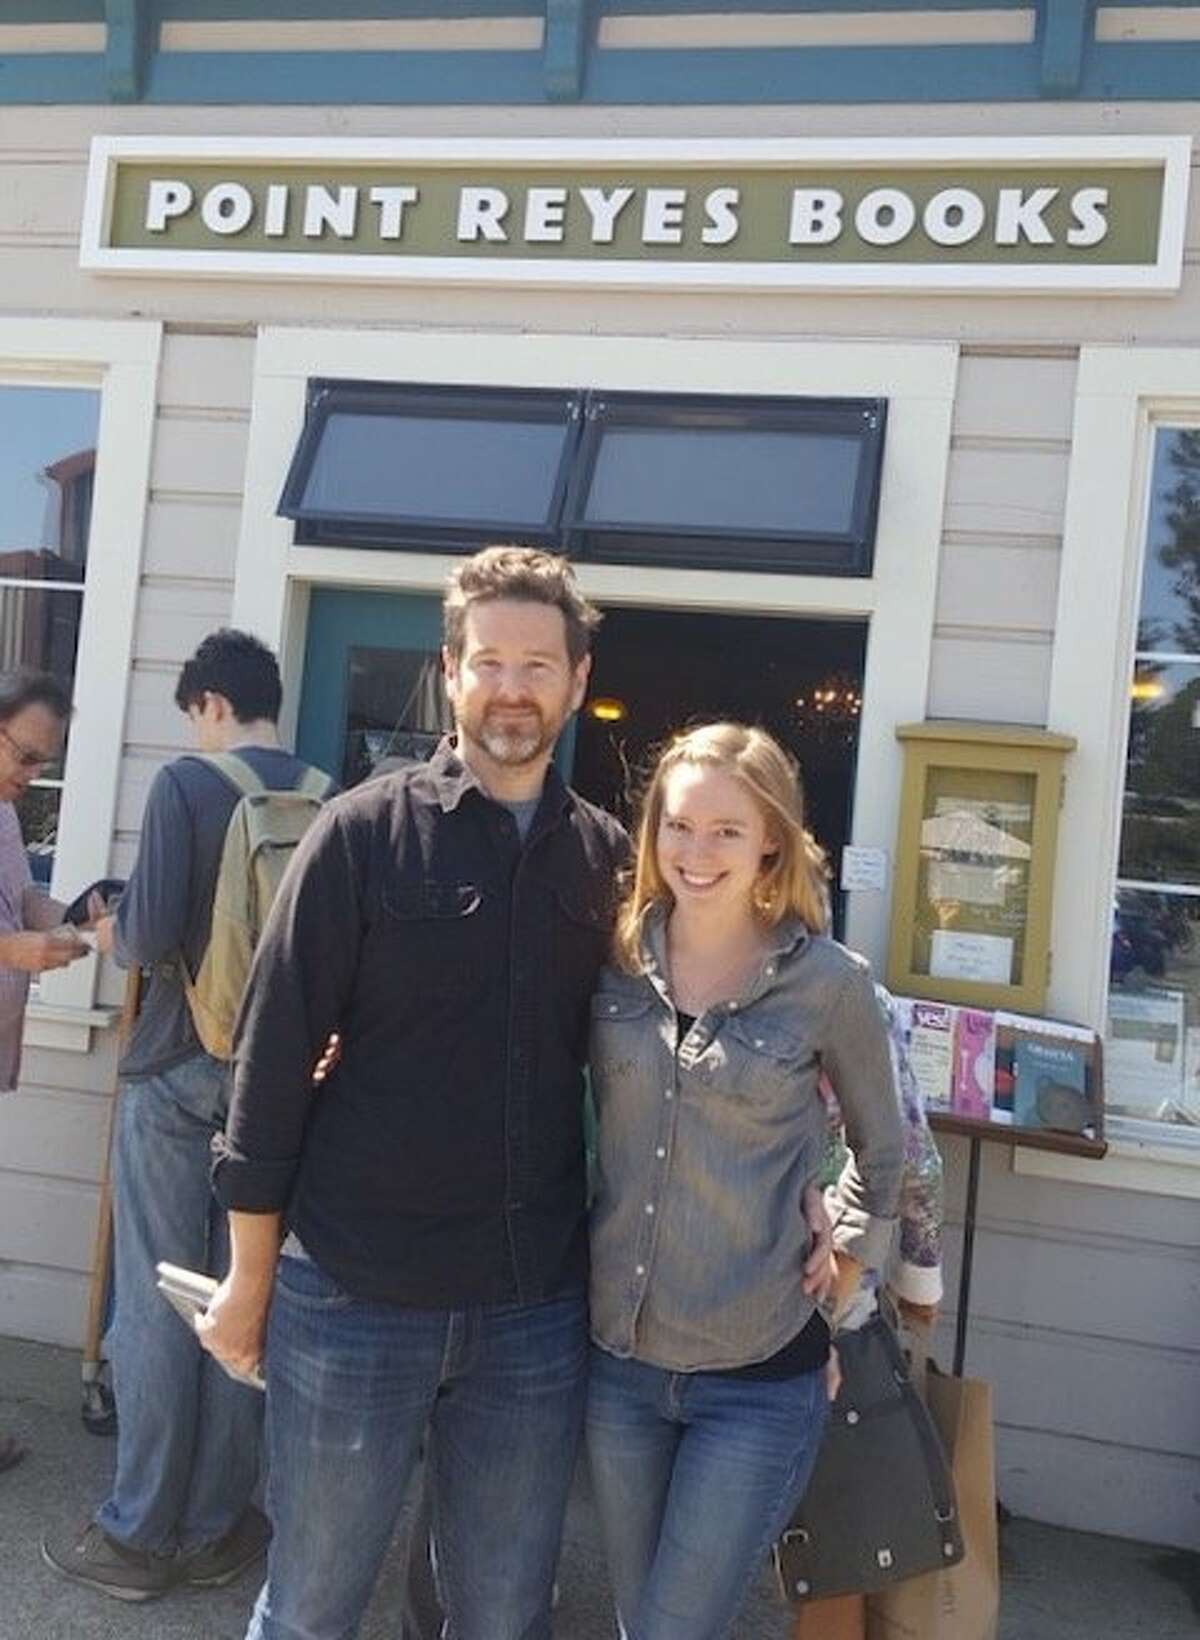 Stephen Sparks and Molly Parent at Point Reyes Books.